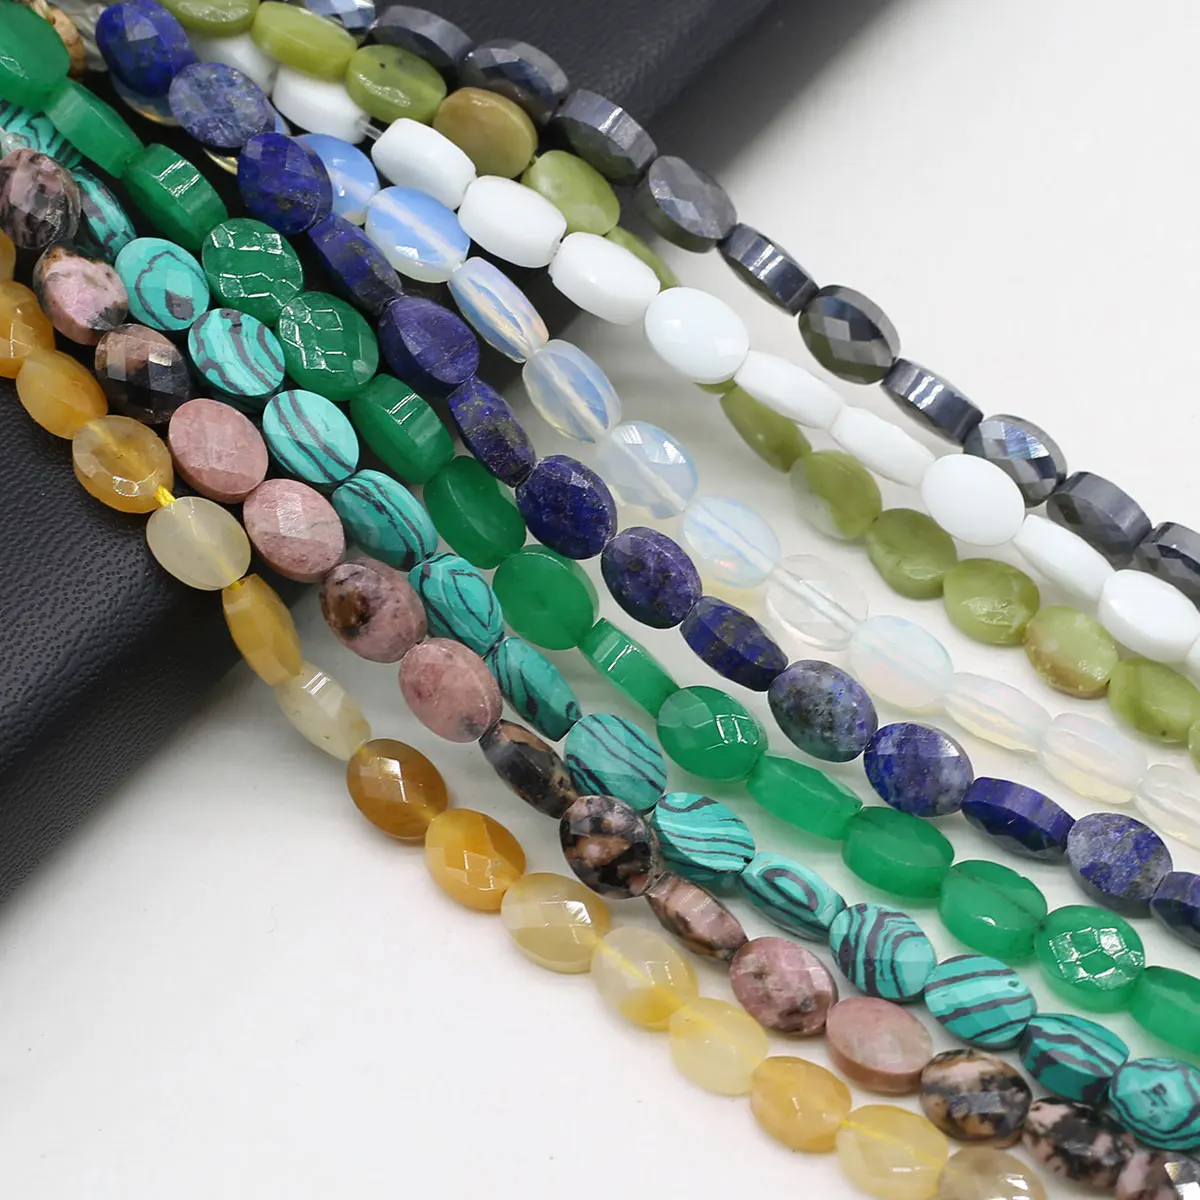 

Natural Stone Beads Rose Quartz/Malachite/Agates Oval Faceted Beads For Jewelry Making DIY Necklace Bracelet Earrings Accessory